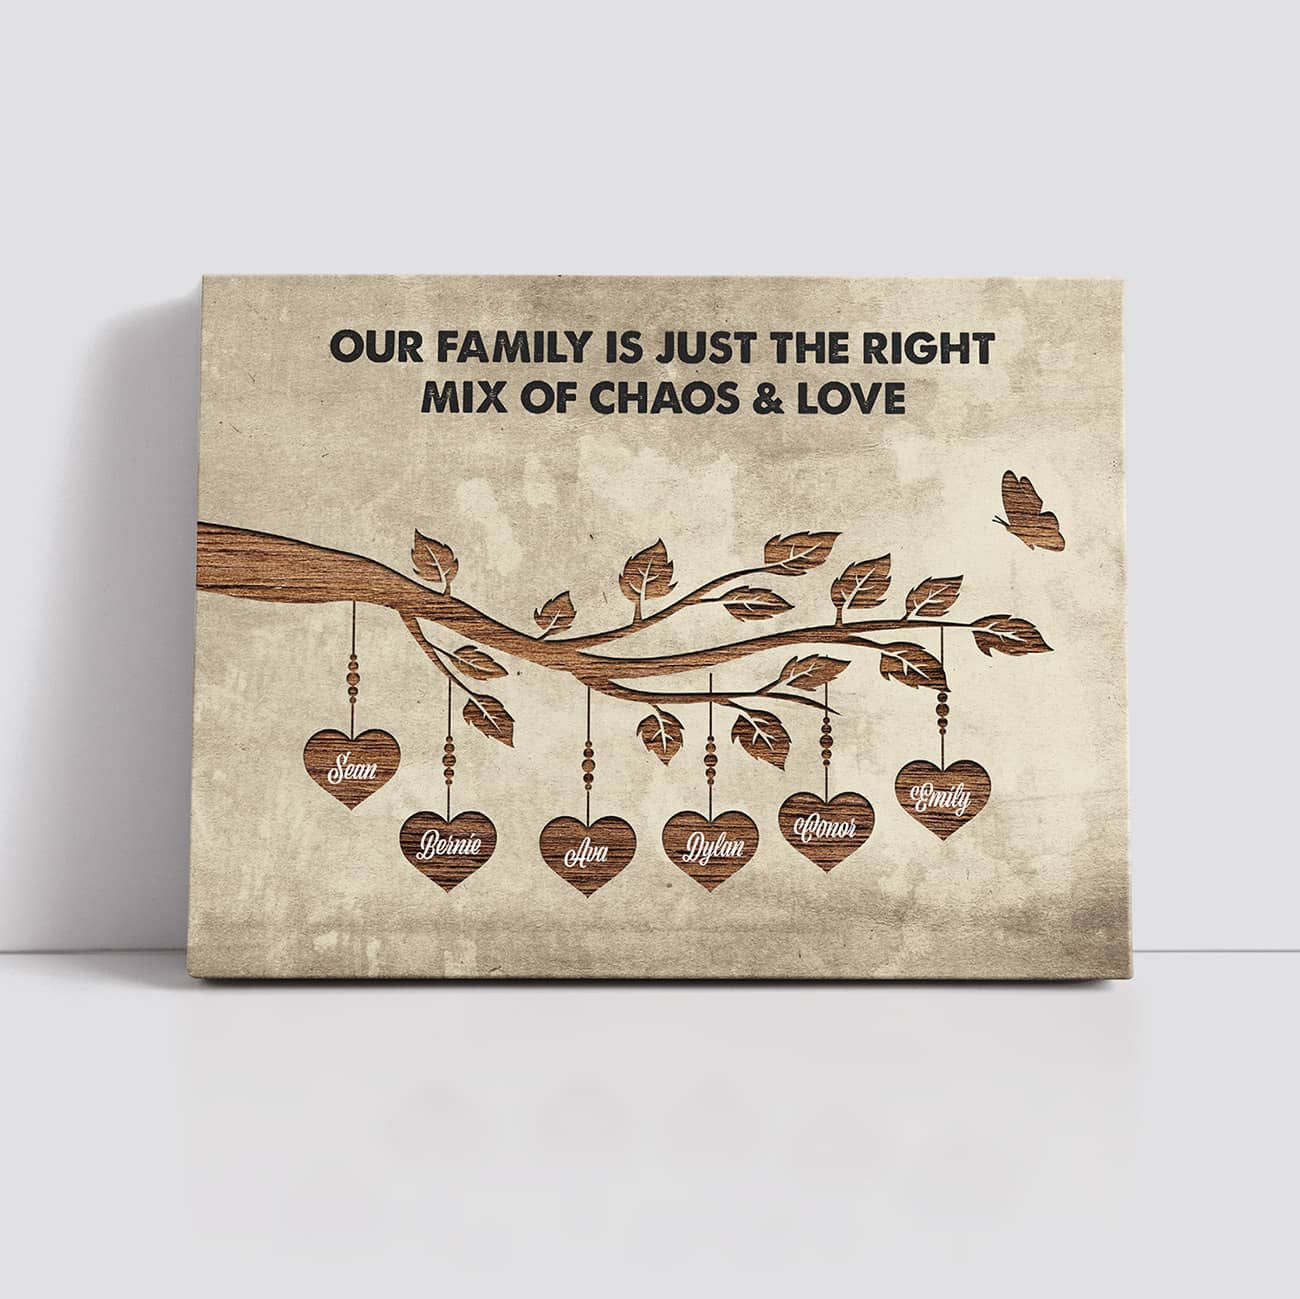 Family Canvas featuring the quote "Our Family is just the right mix of chaos and love".